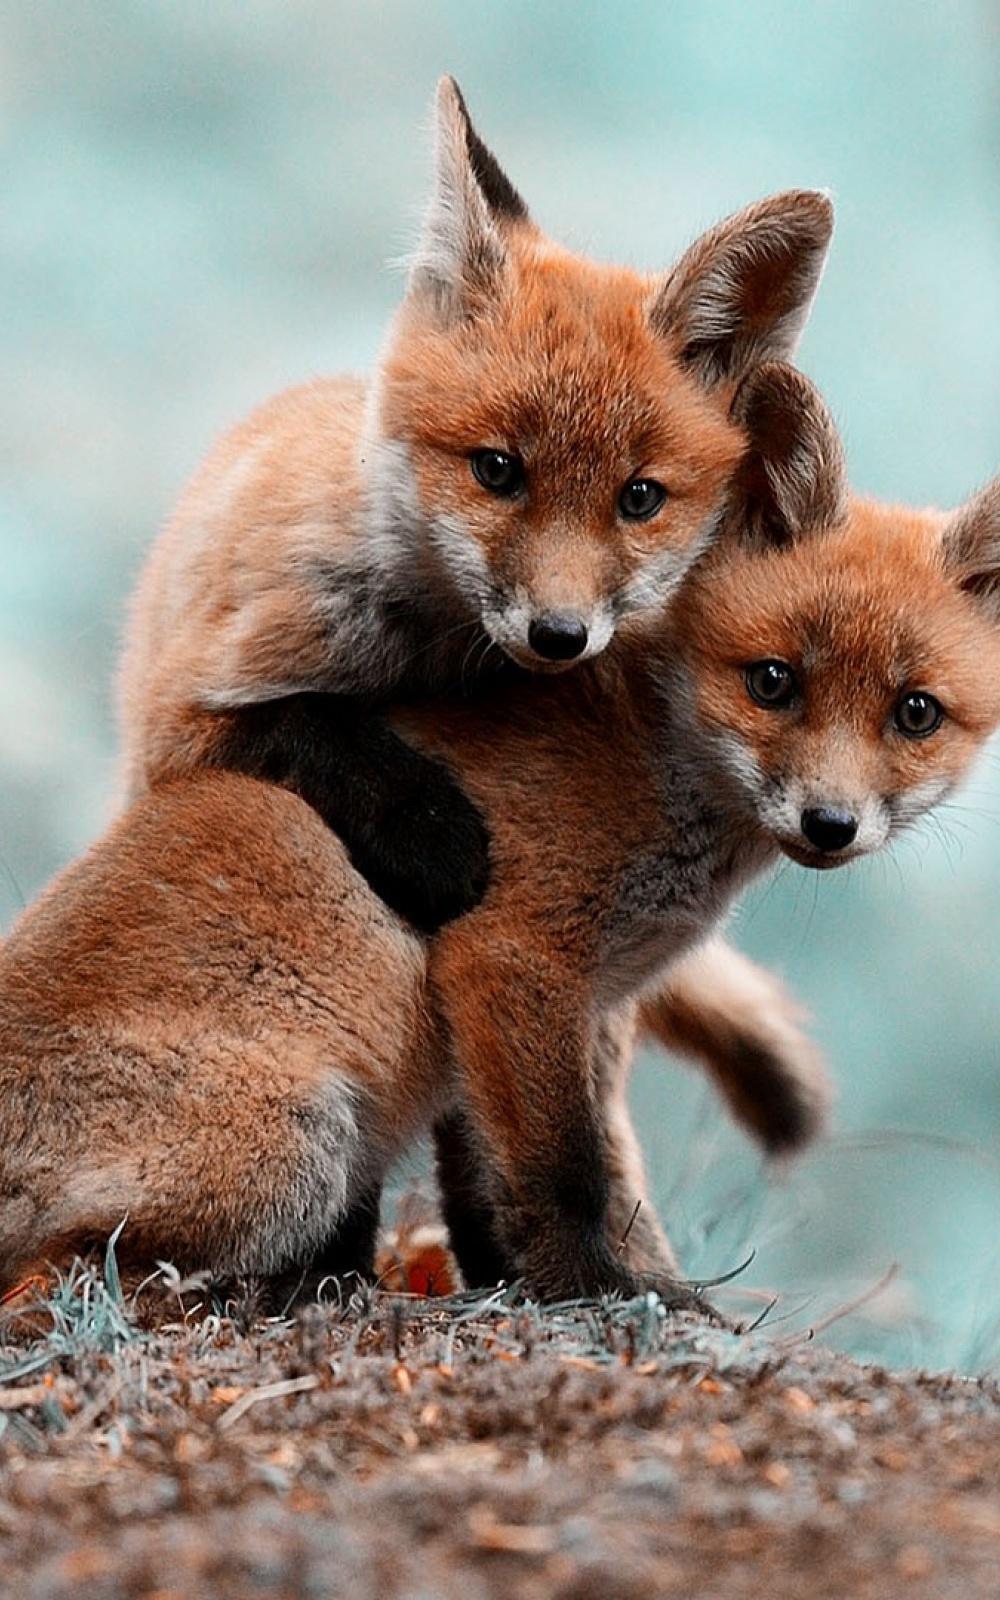 Two Fox Cubs Android Wallpaper free download